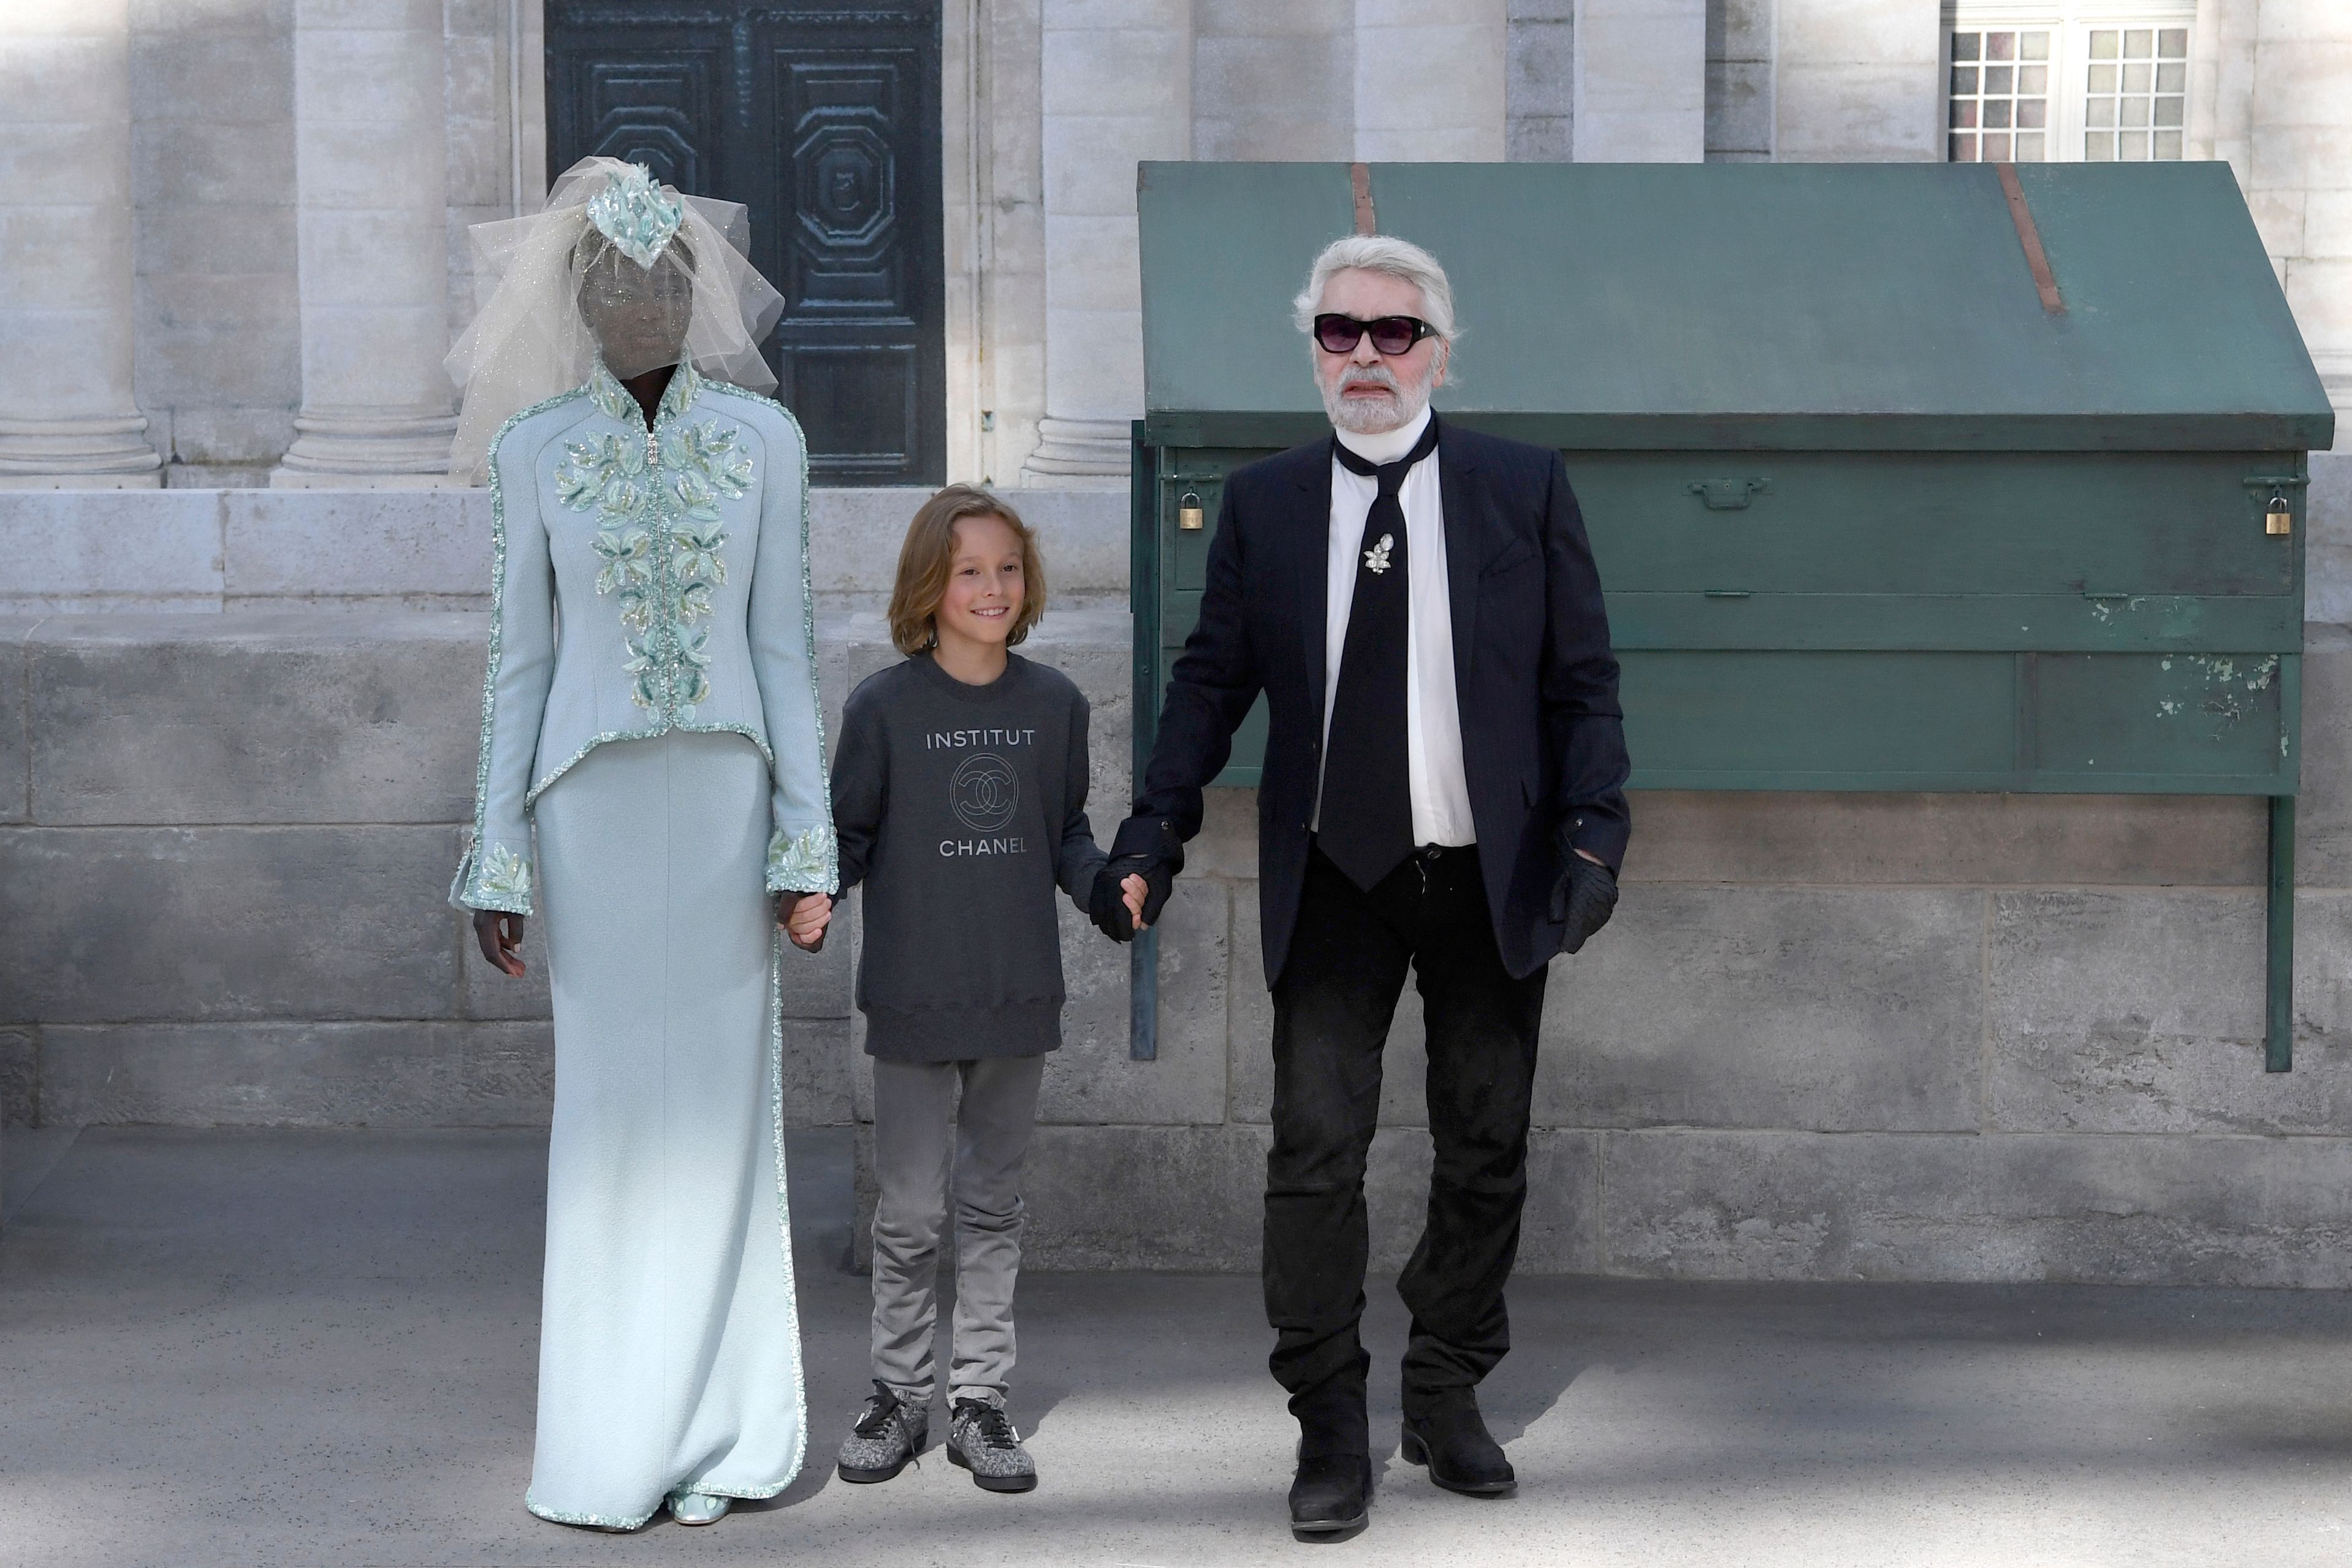 Karl Lagerfeld Takes Us Into the World of Chanel in New Netflix Docuseries  7 Days Out